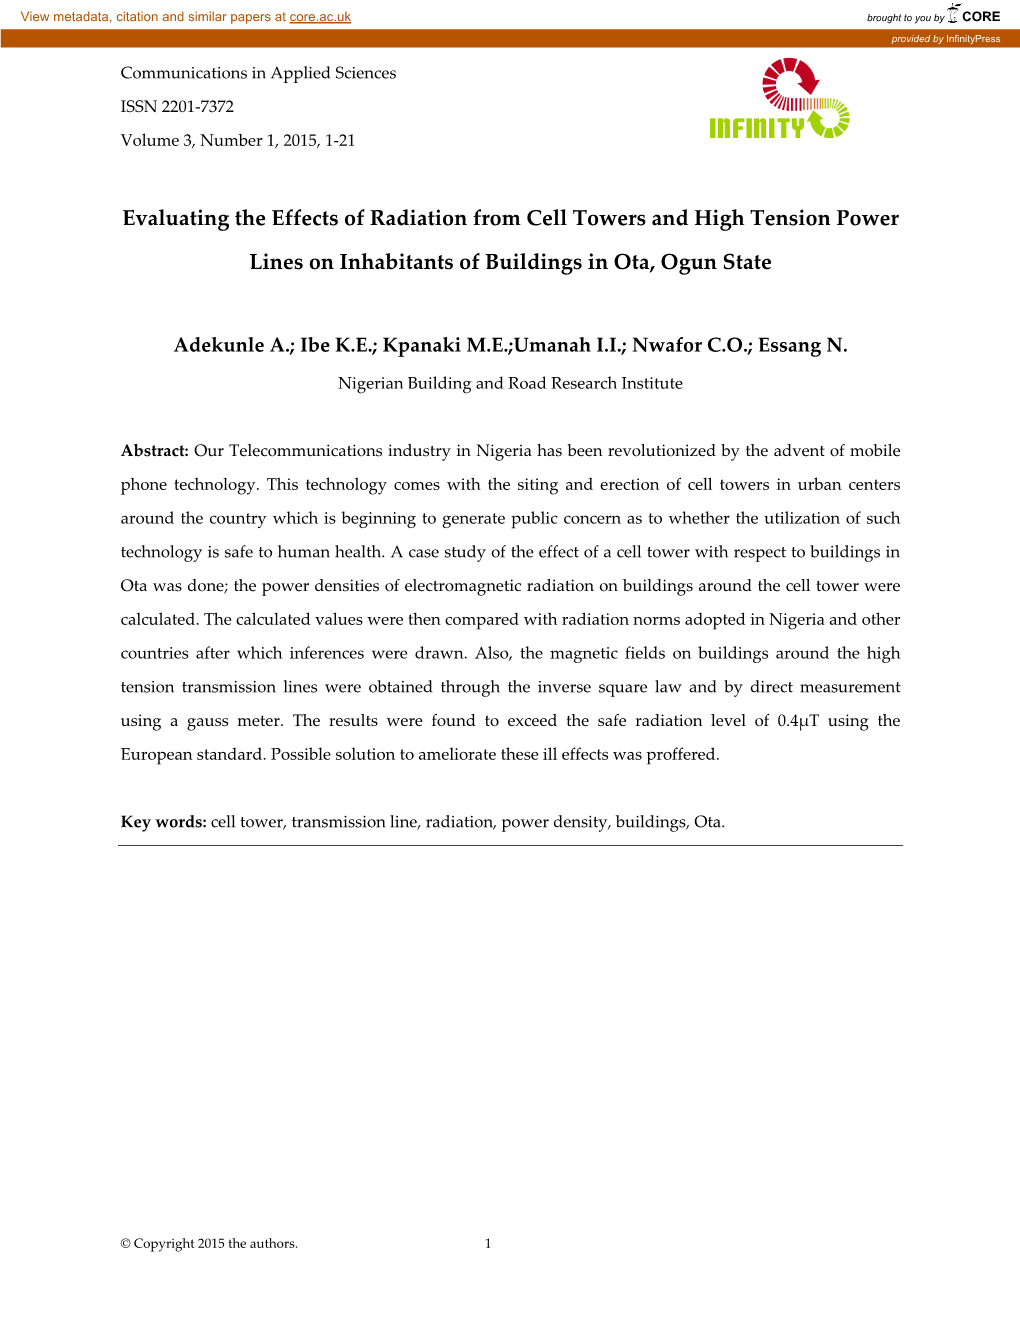 Evaluating the Effects of Radiation from Cell Towers and High Tension Power